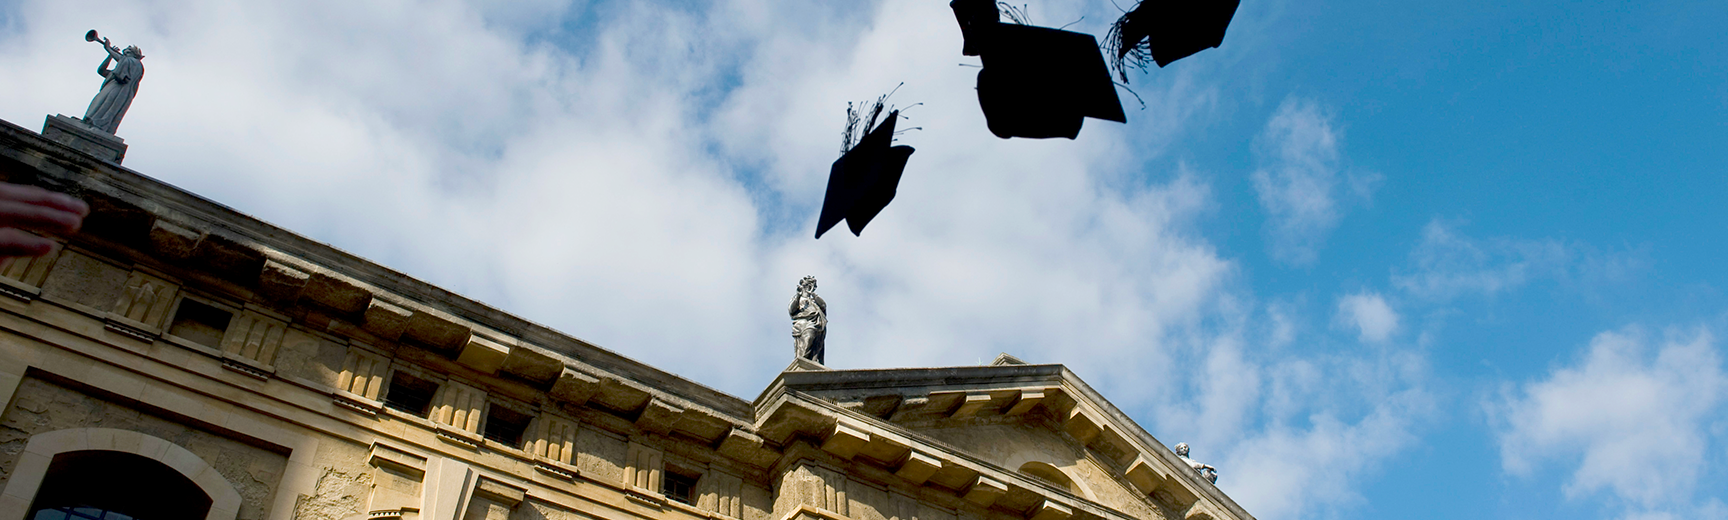 Mortar boards in the air above Sheldonian